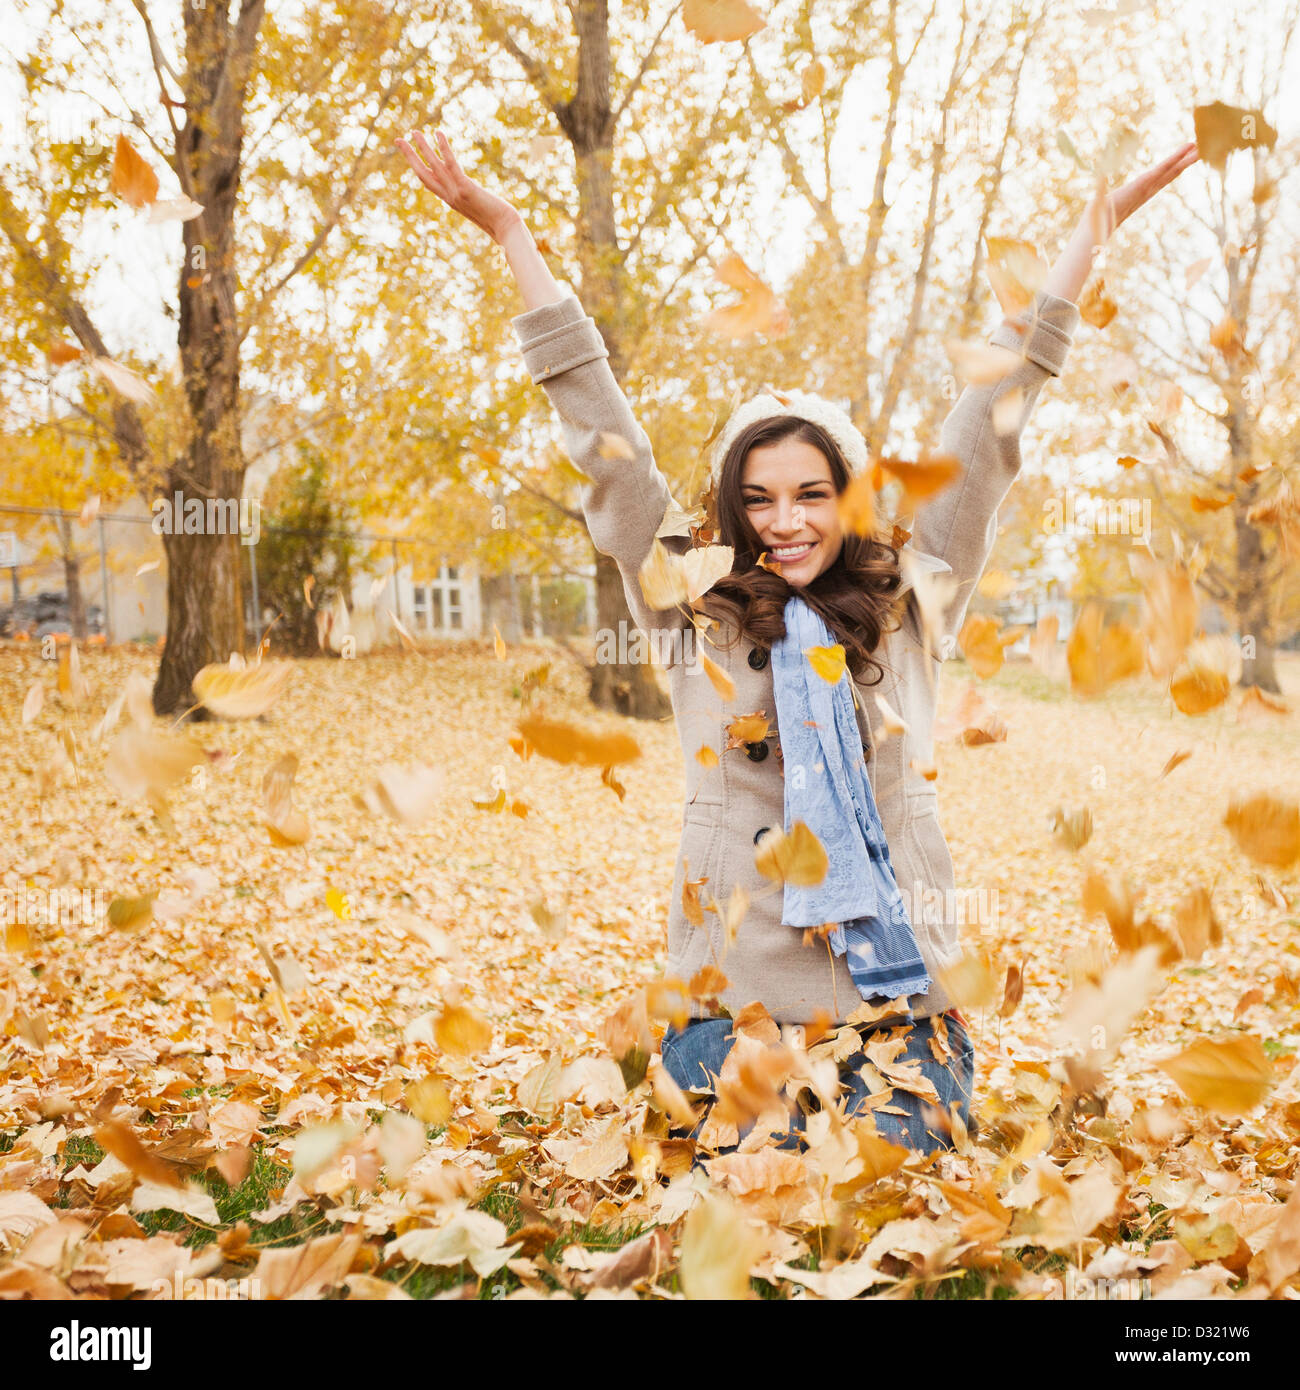 Caucasian woman playing in autumn leaves Stock Photo